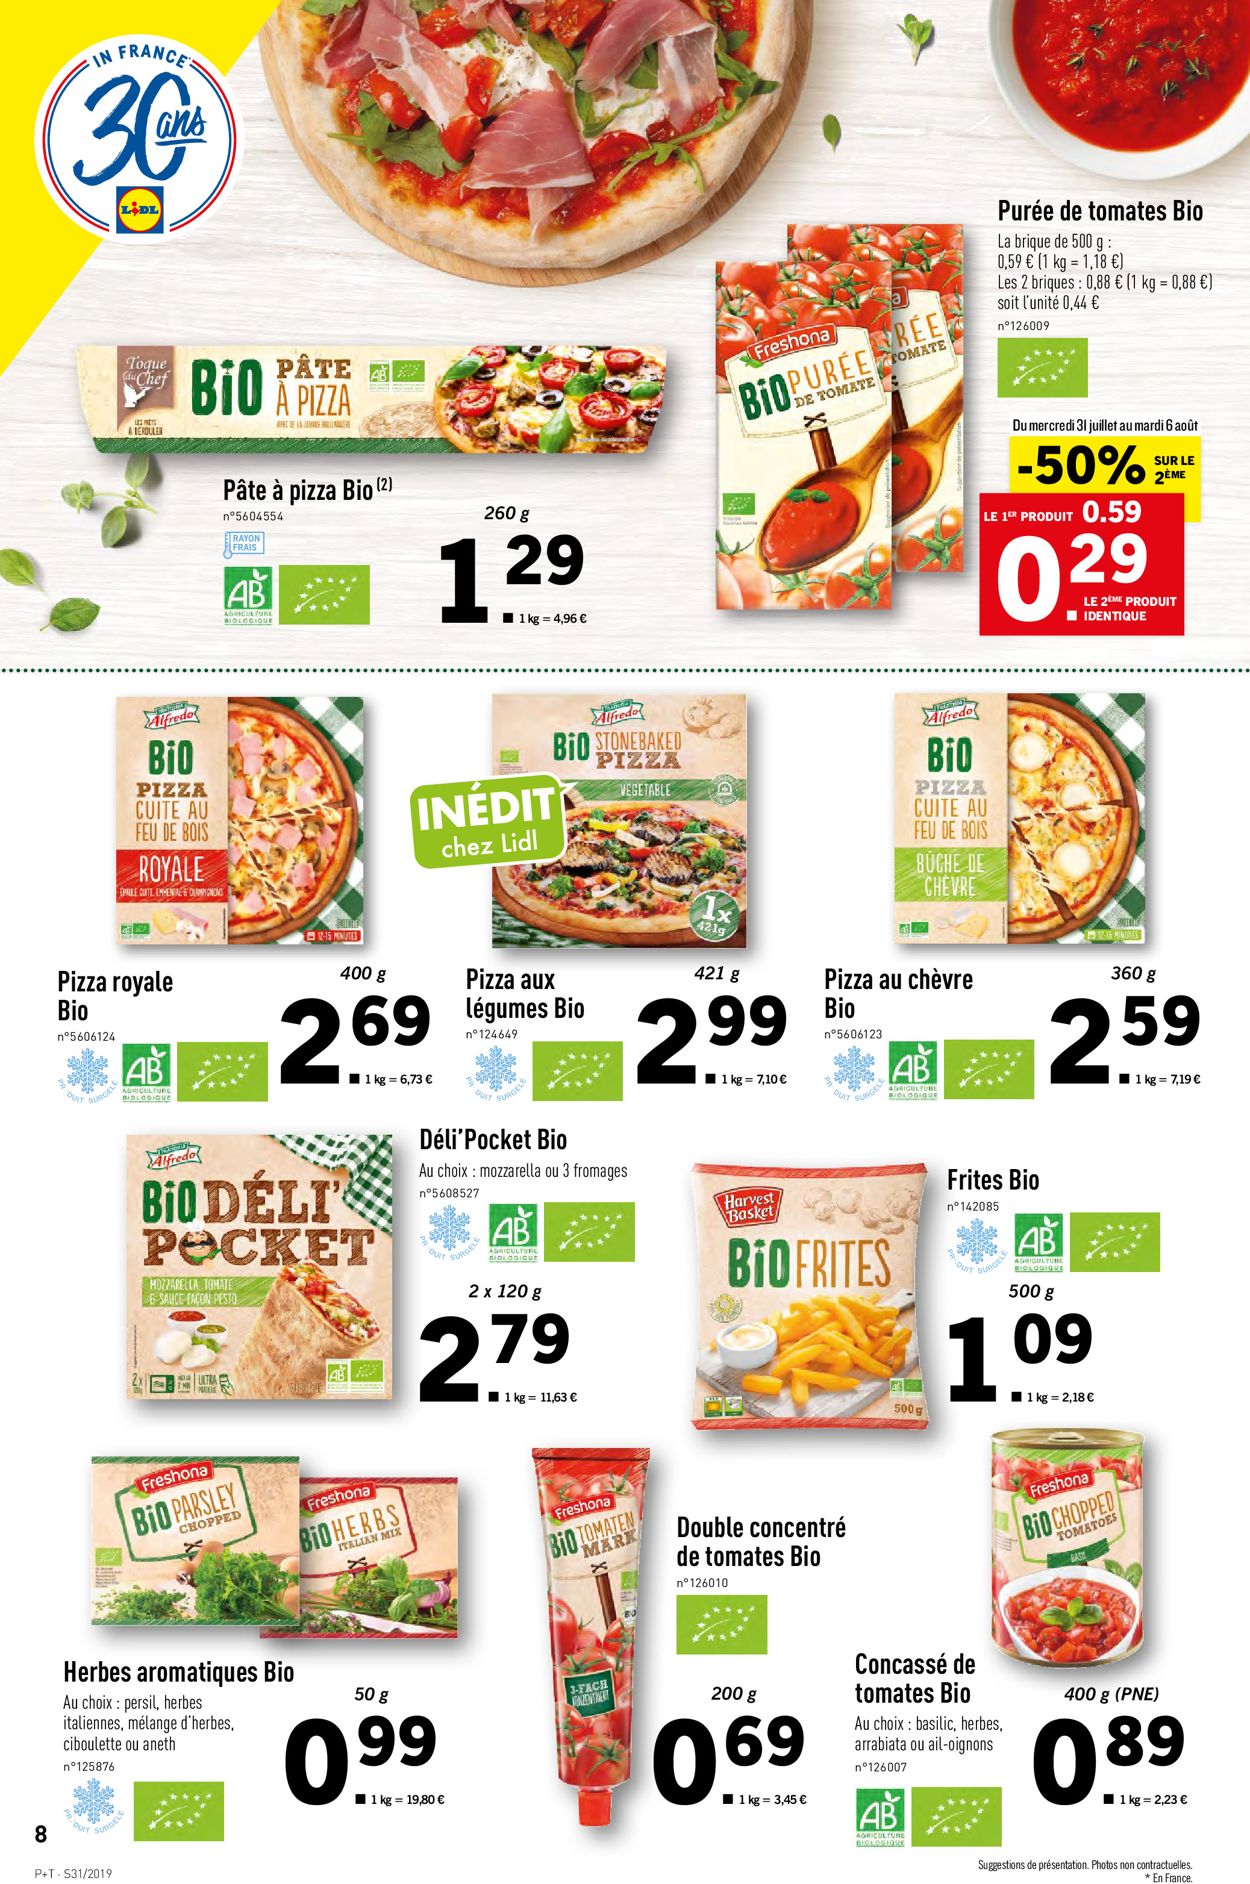 Lidl Catalogue - 31.07-06.08.2019 (Page 8)